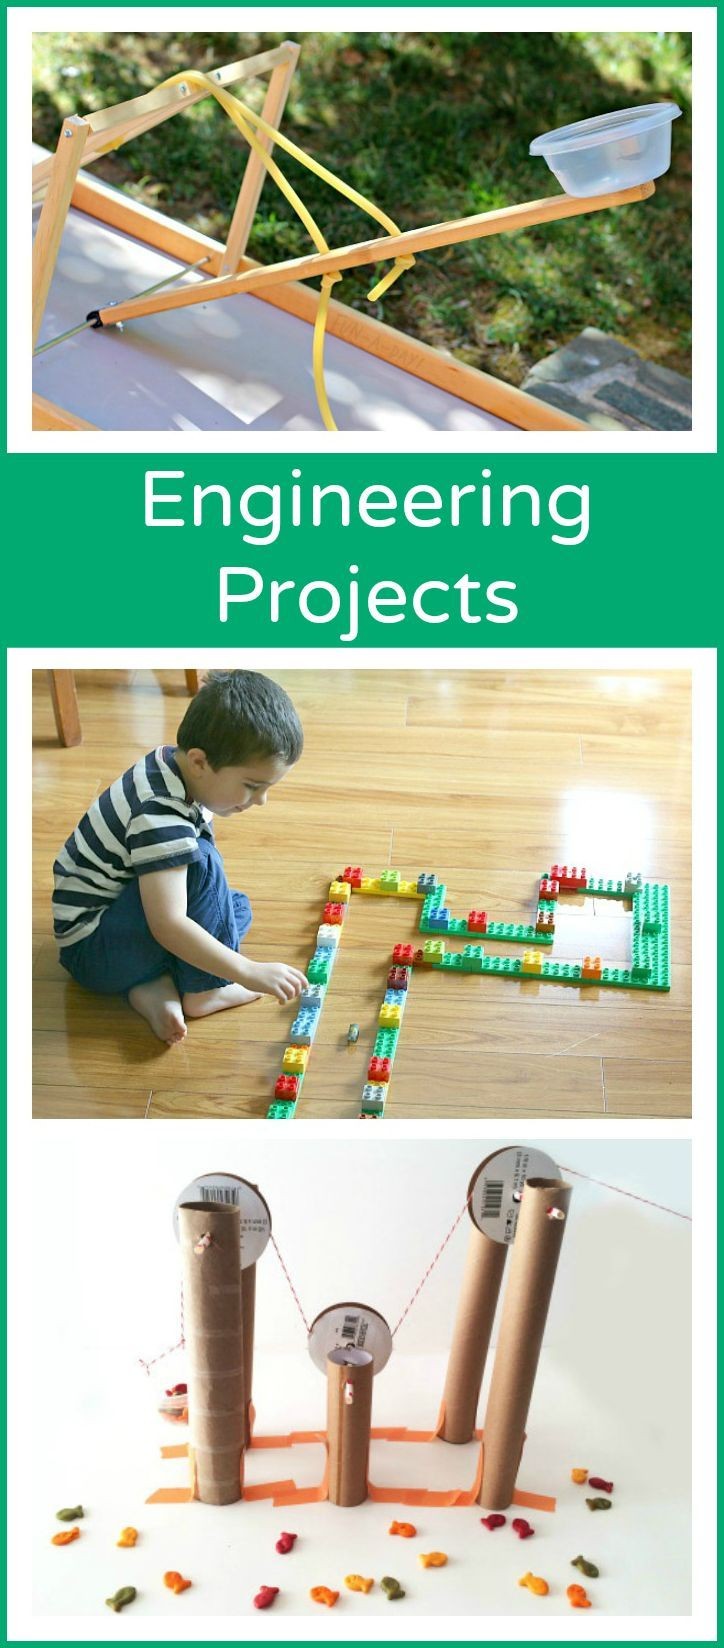 Engineering Activities for Kids - an awesome colle...